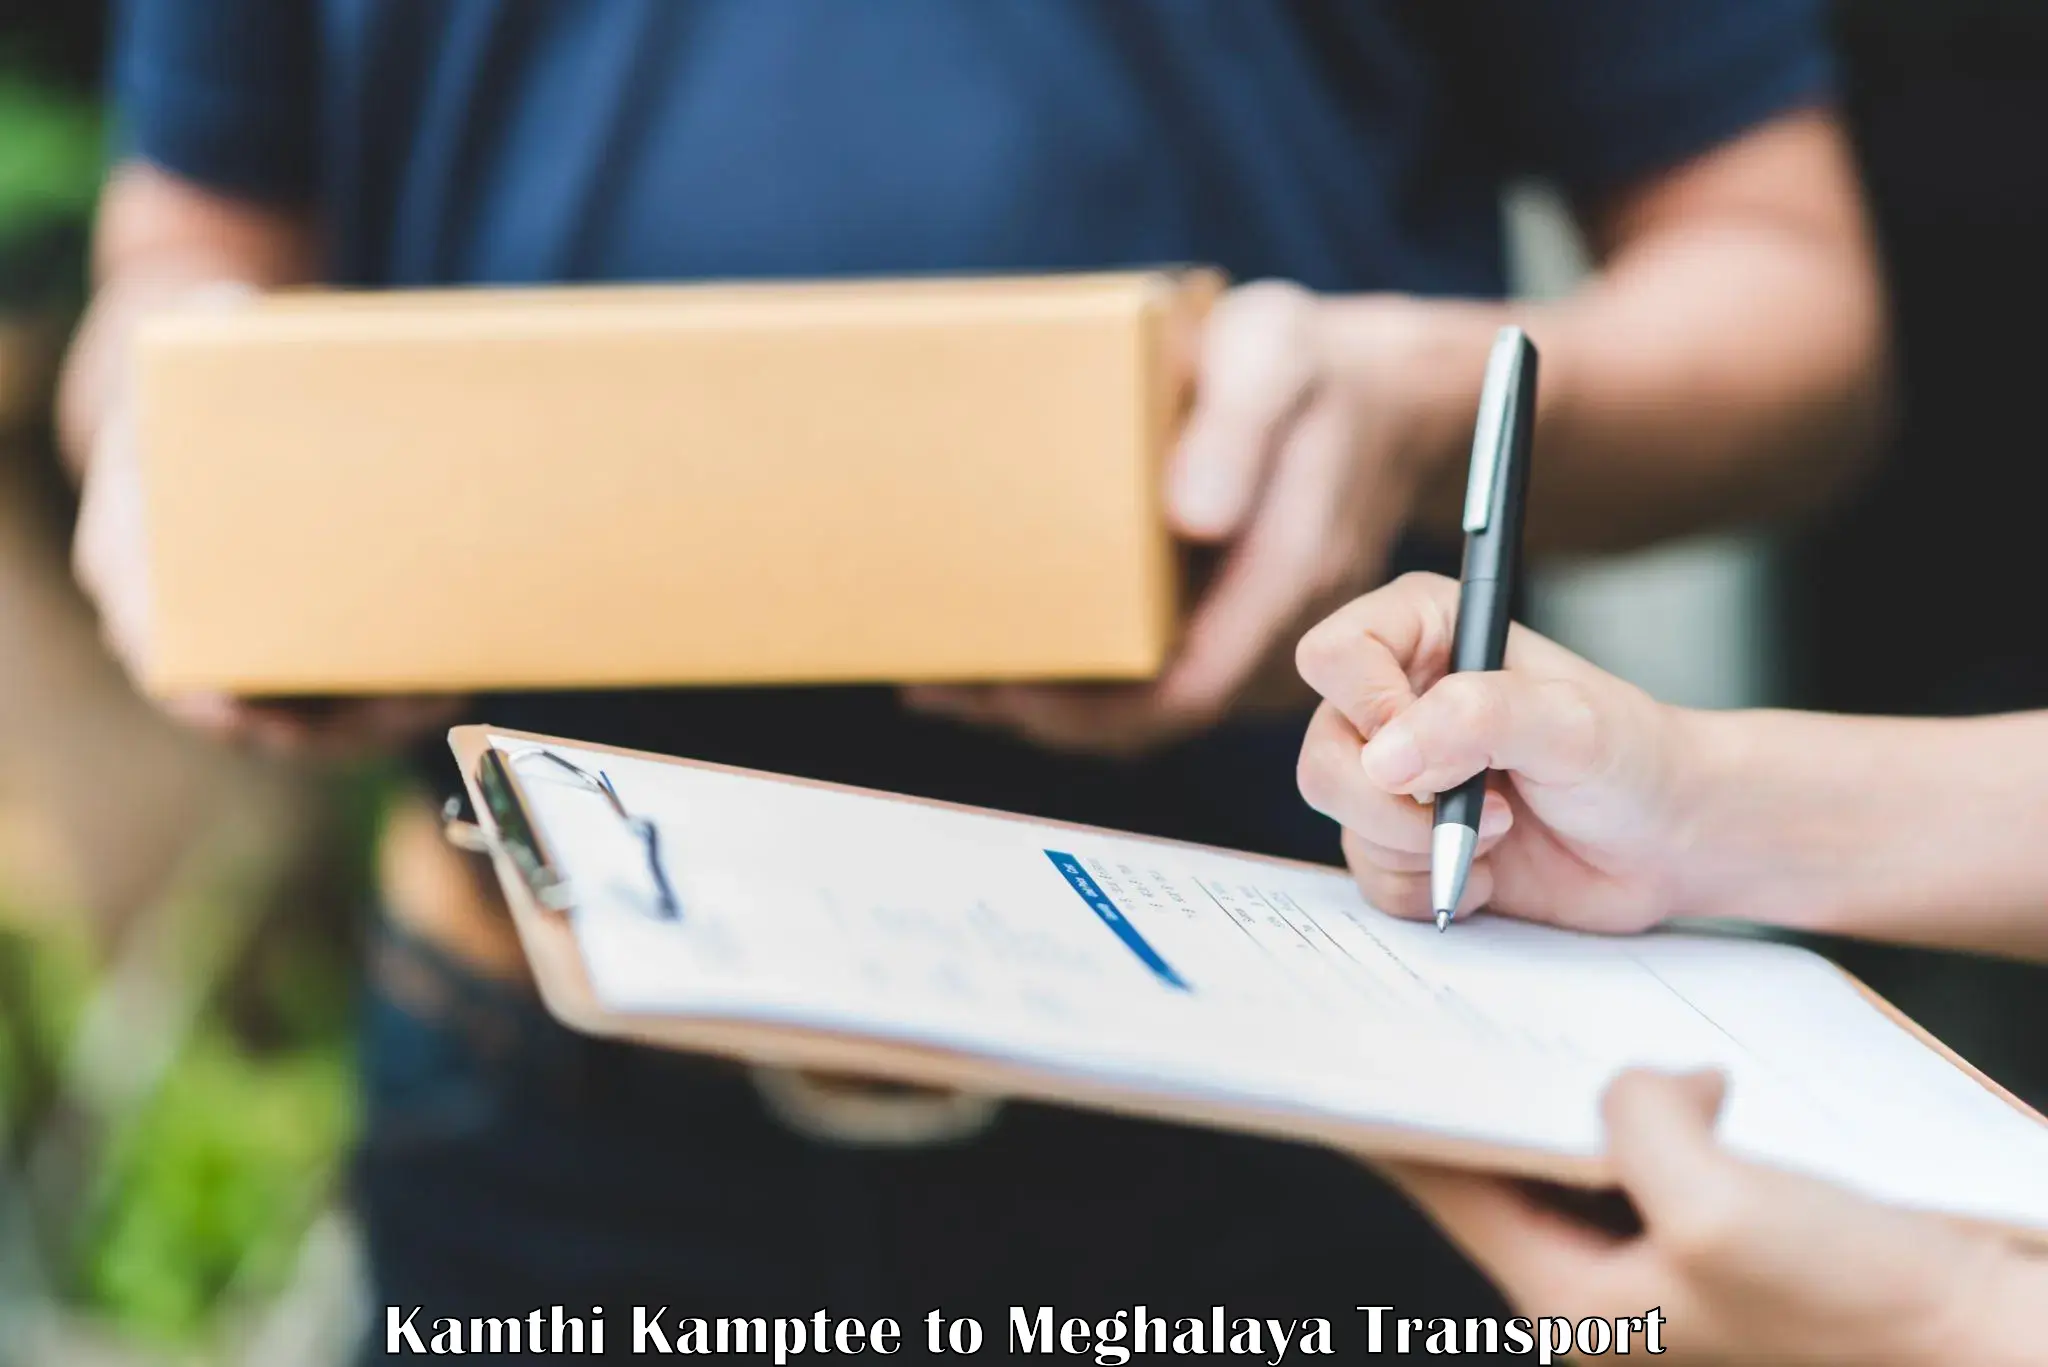 Nationwide transport services Kamthi Kamptee to Shillong